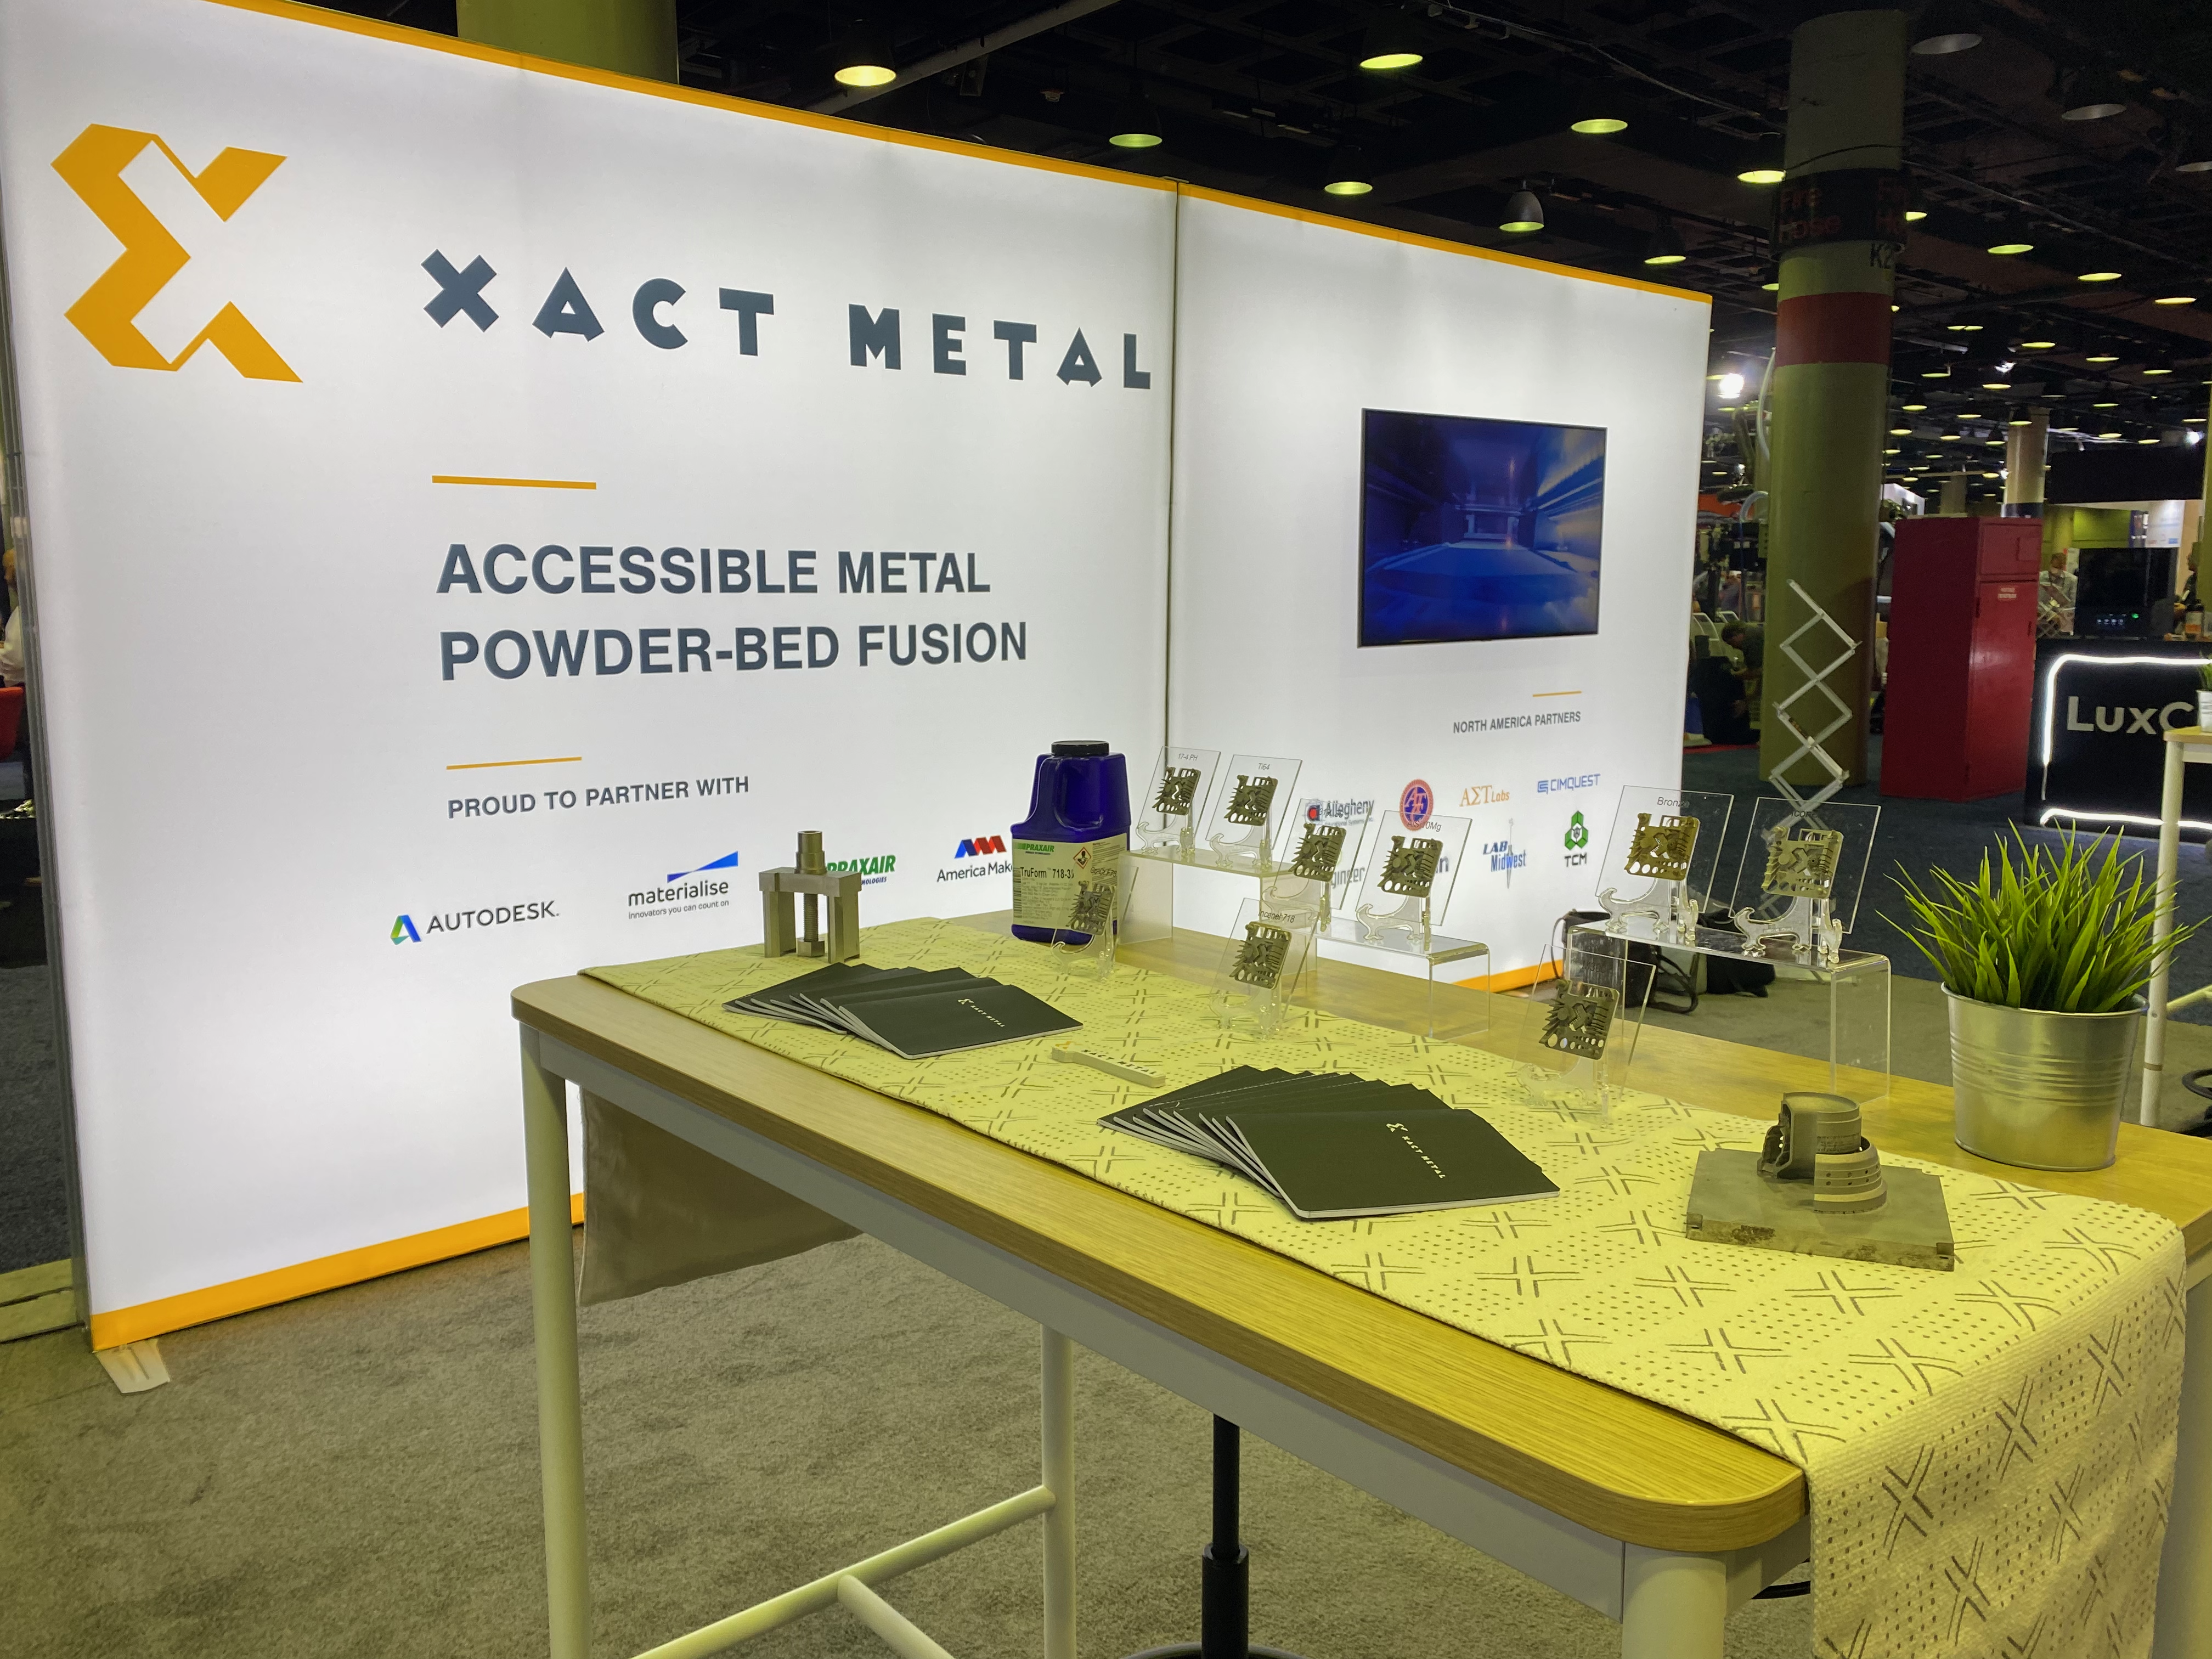 Low-Cost Metal 3D printing exhibiting at Rapid + TCT